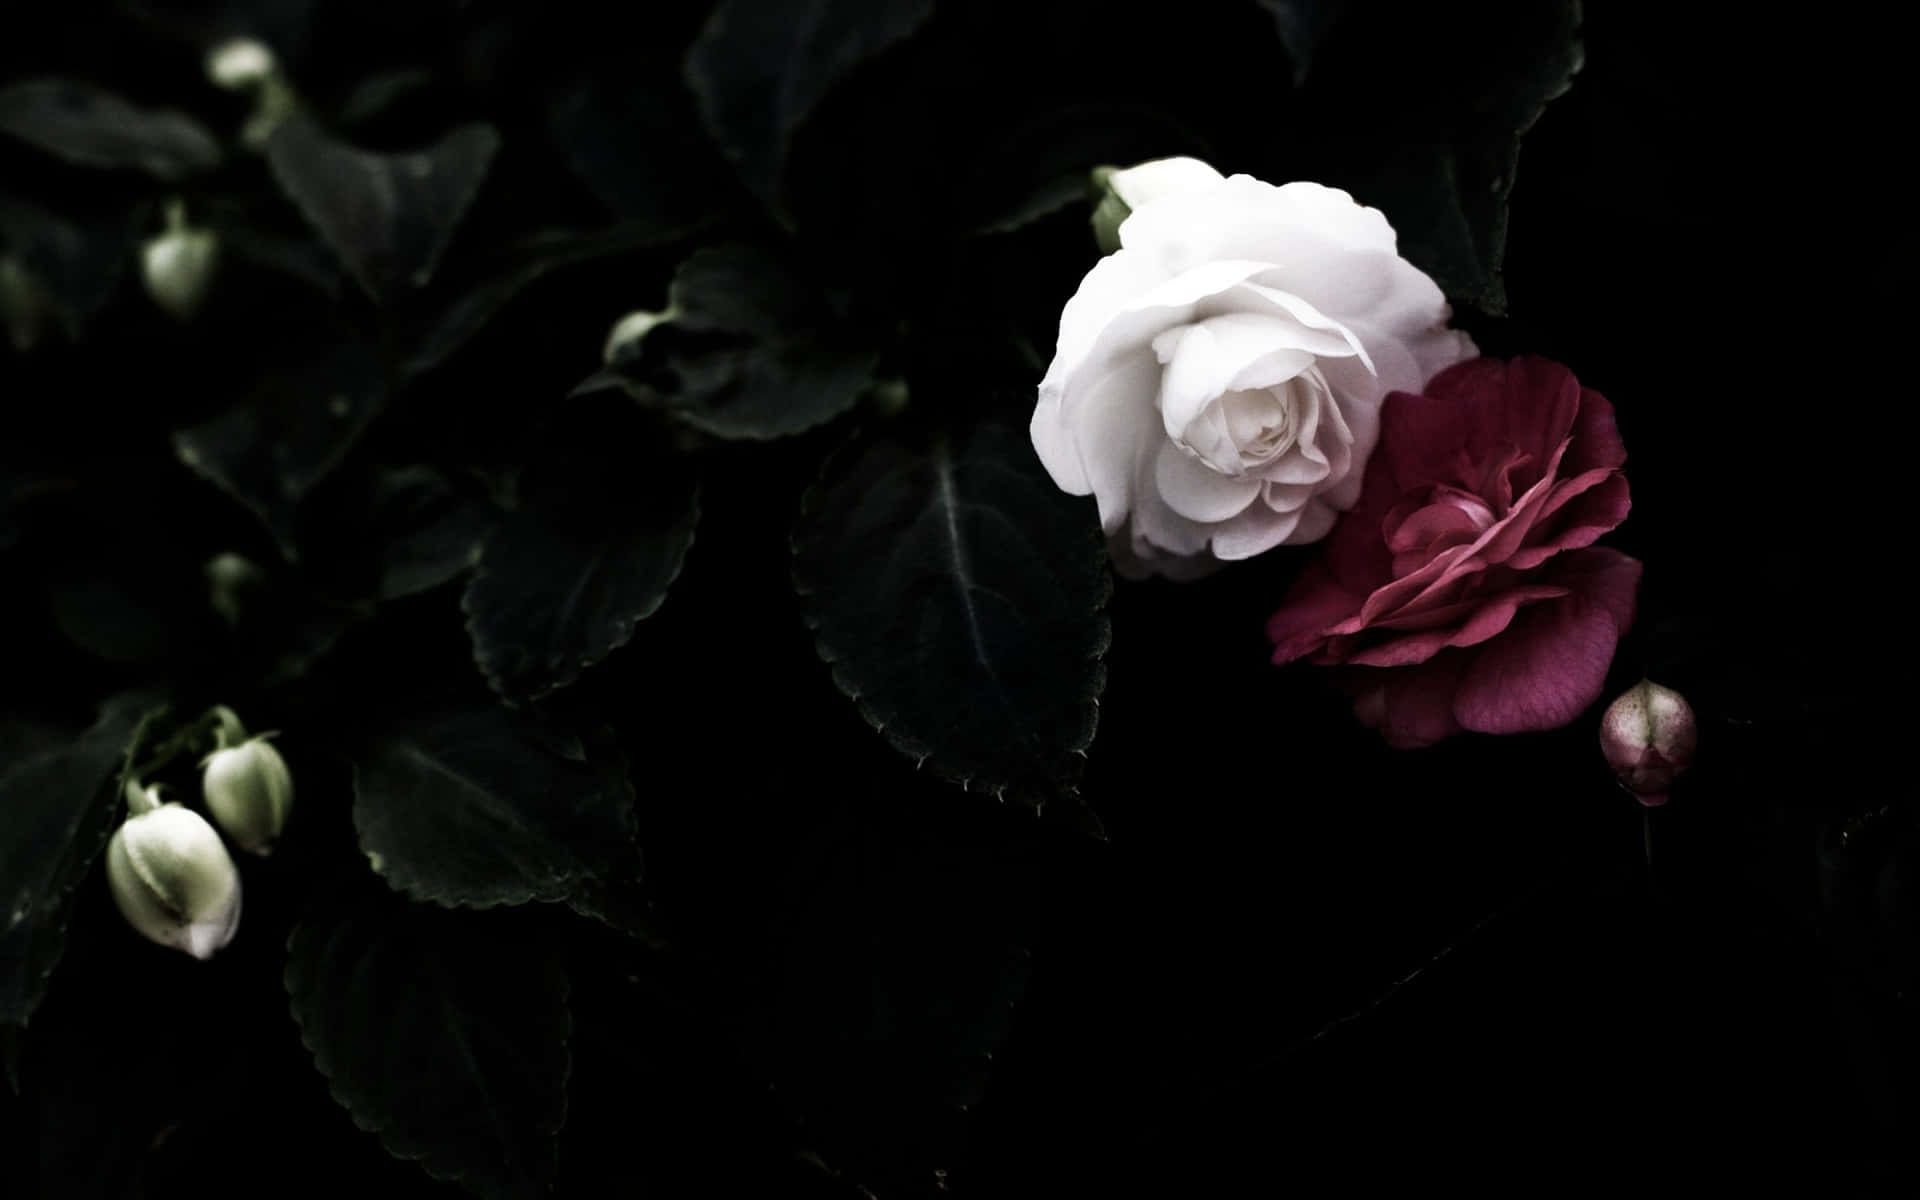 The Beauty Of A Black Rose.